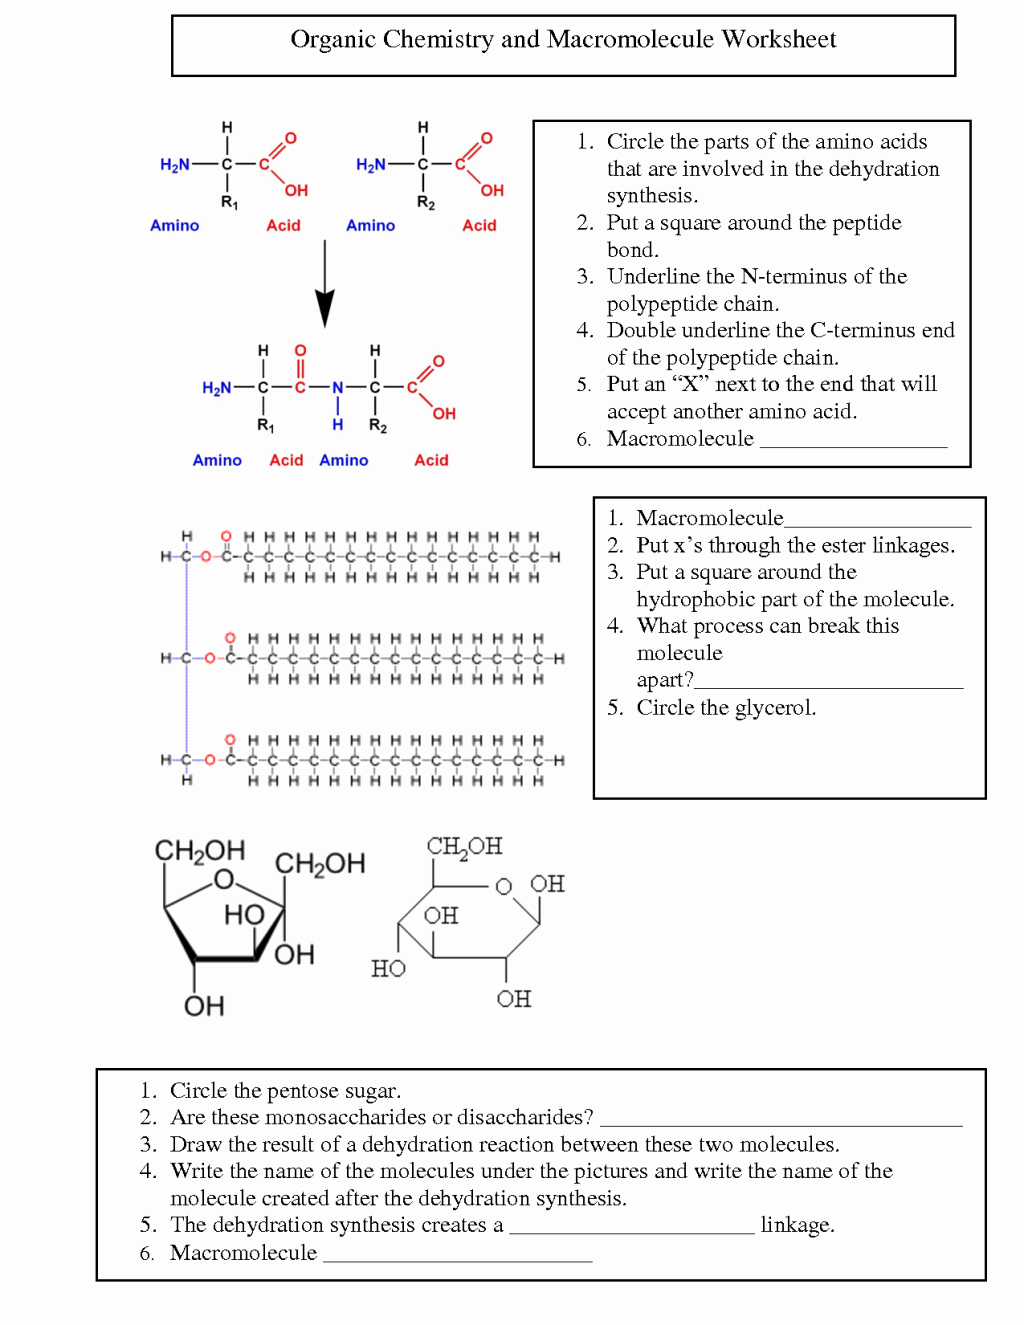 Organic Chemistry Worksheet with Answers New organic Chemistry Worksheet Biological Science Picture